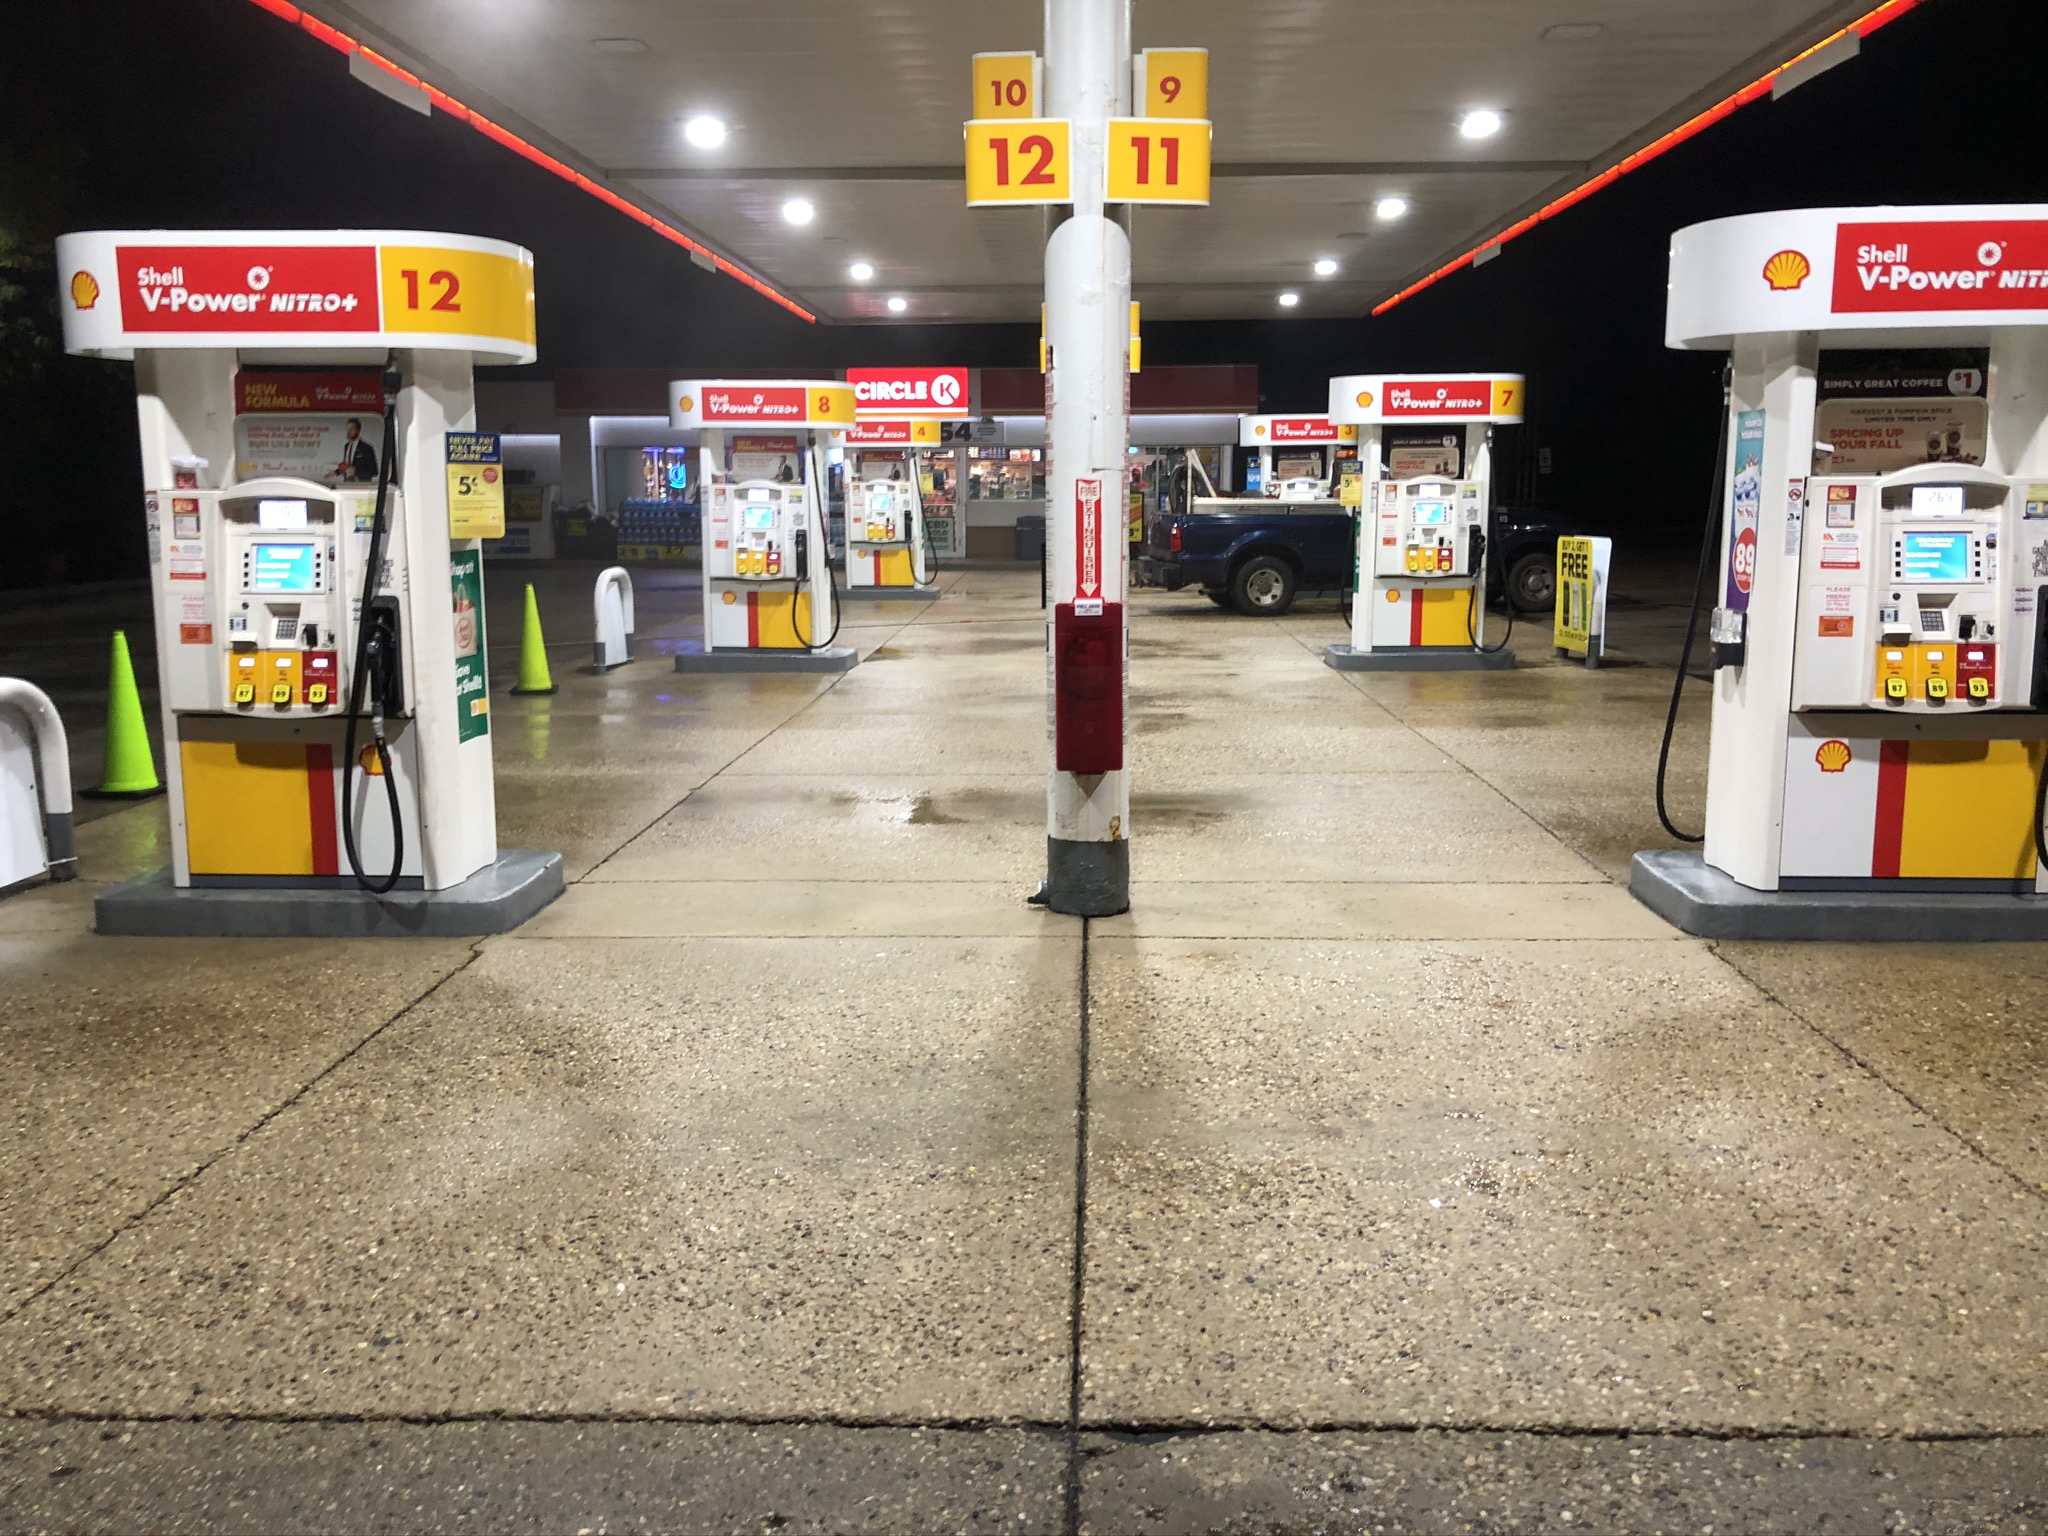 whitehouse-tx-power-washing-gas-station-after-precisely-clean